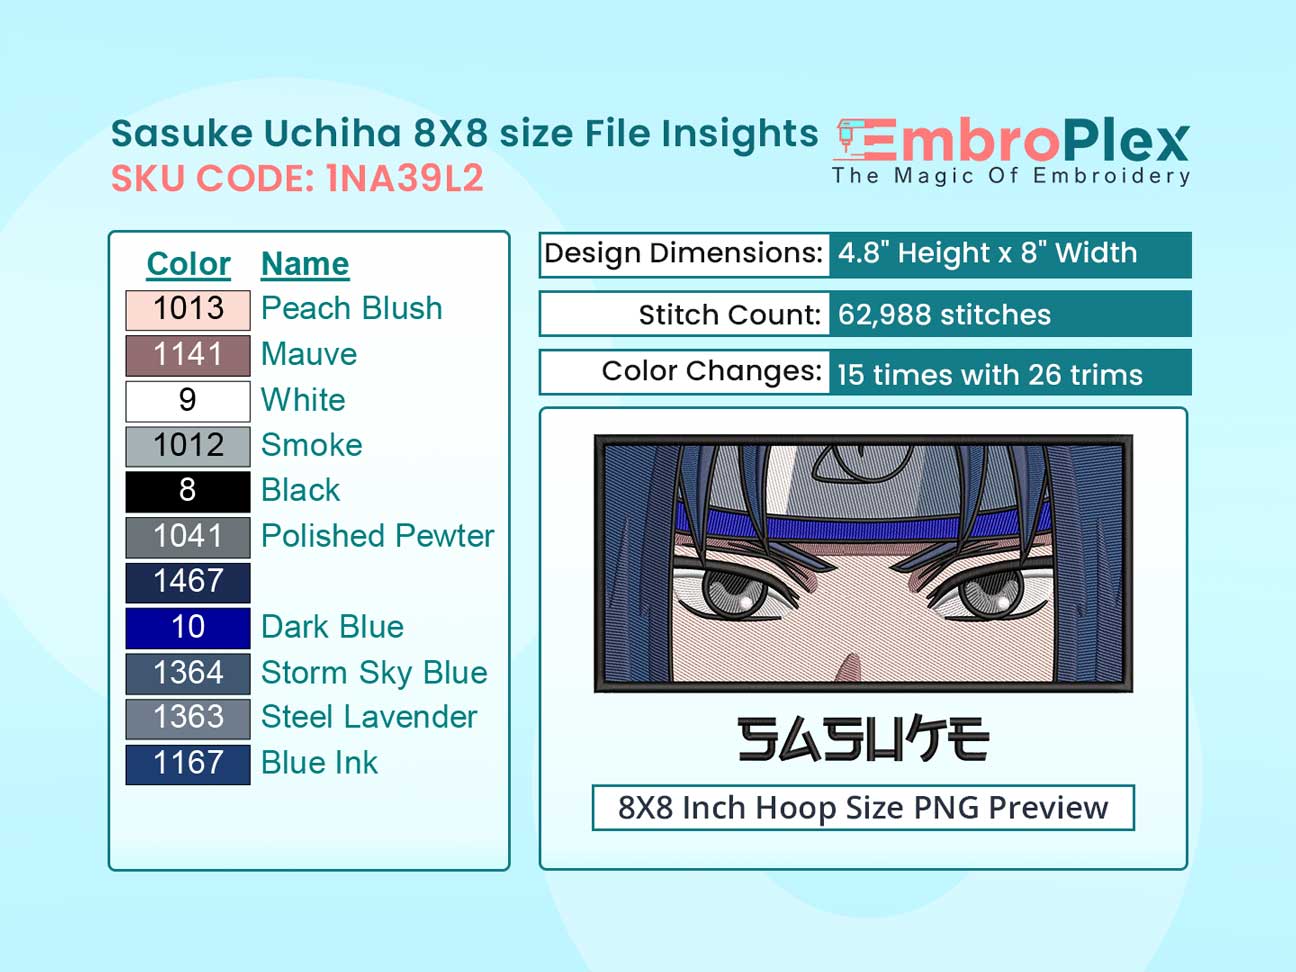 Anime-Inspired Sasuke Uchiha Embroidery Design File - 8x8 Inch hoop Size Variation overview image